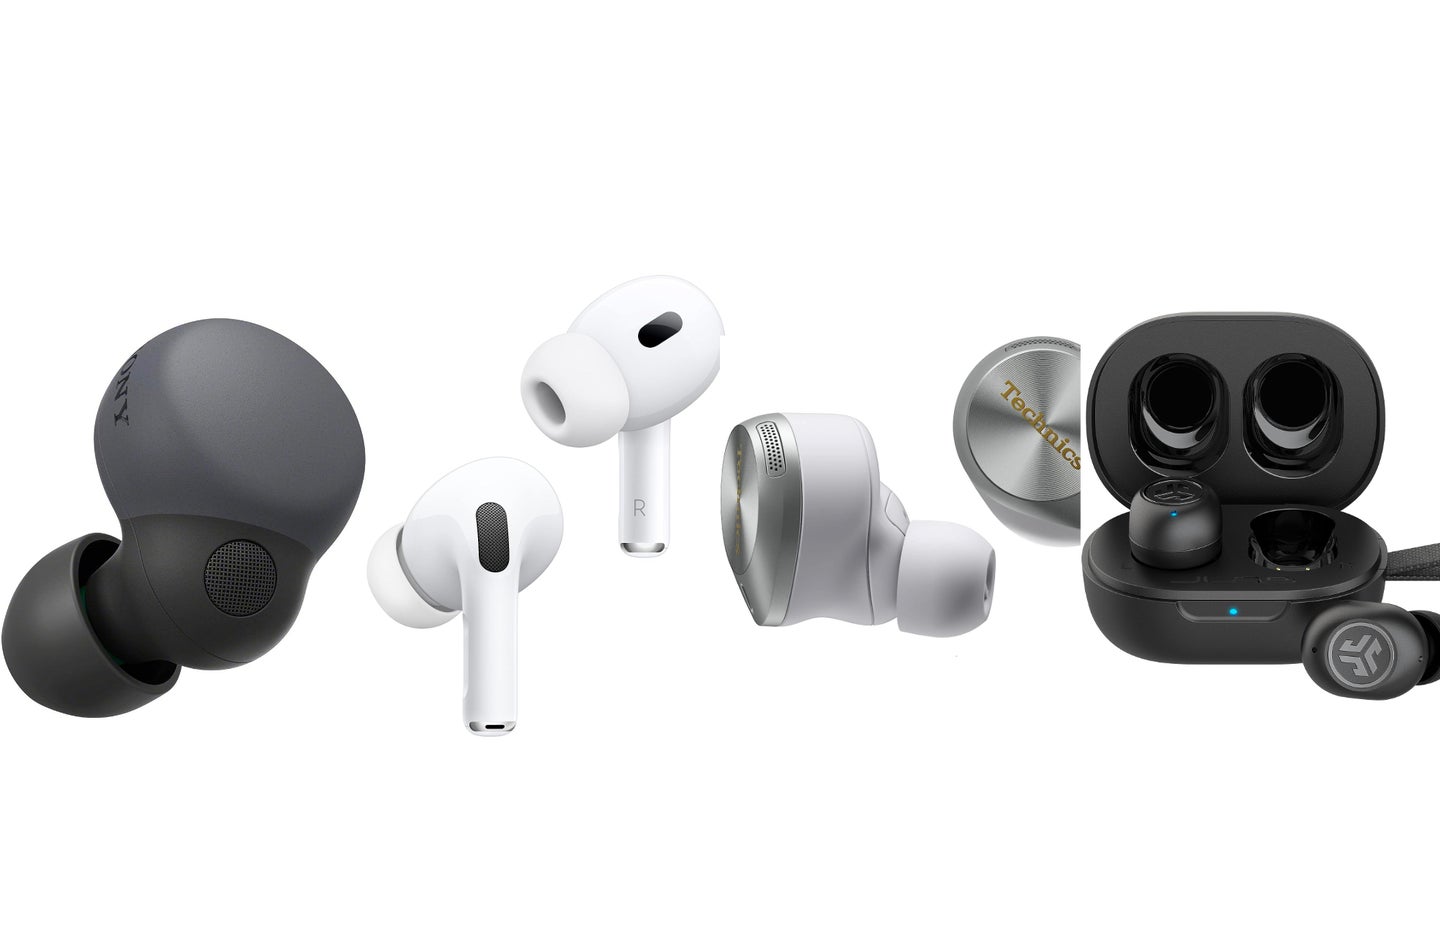 The best earbuds for small ears